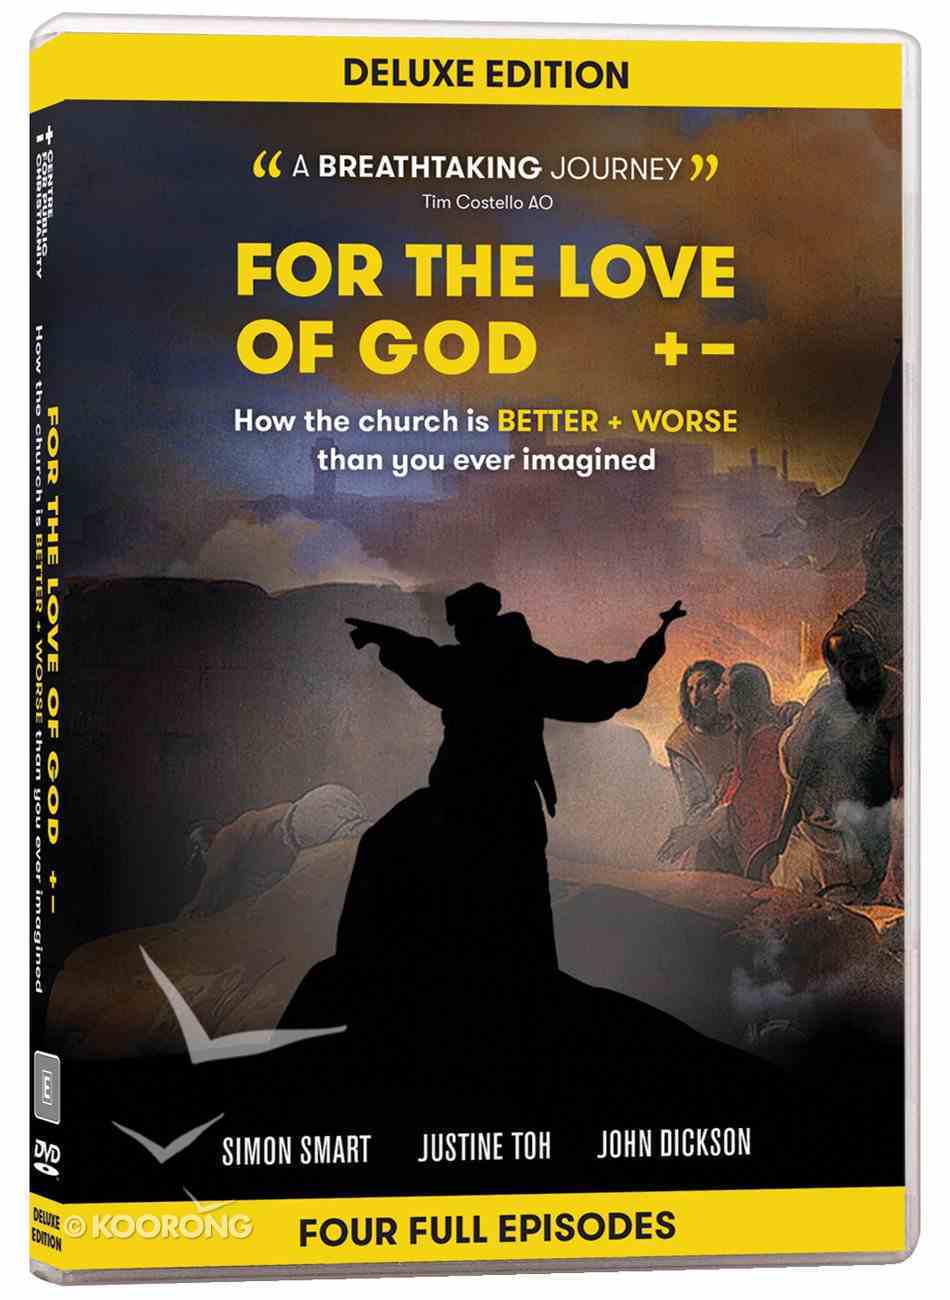 For the Love of God Deluxe Edition (2 Dvds) DVD